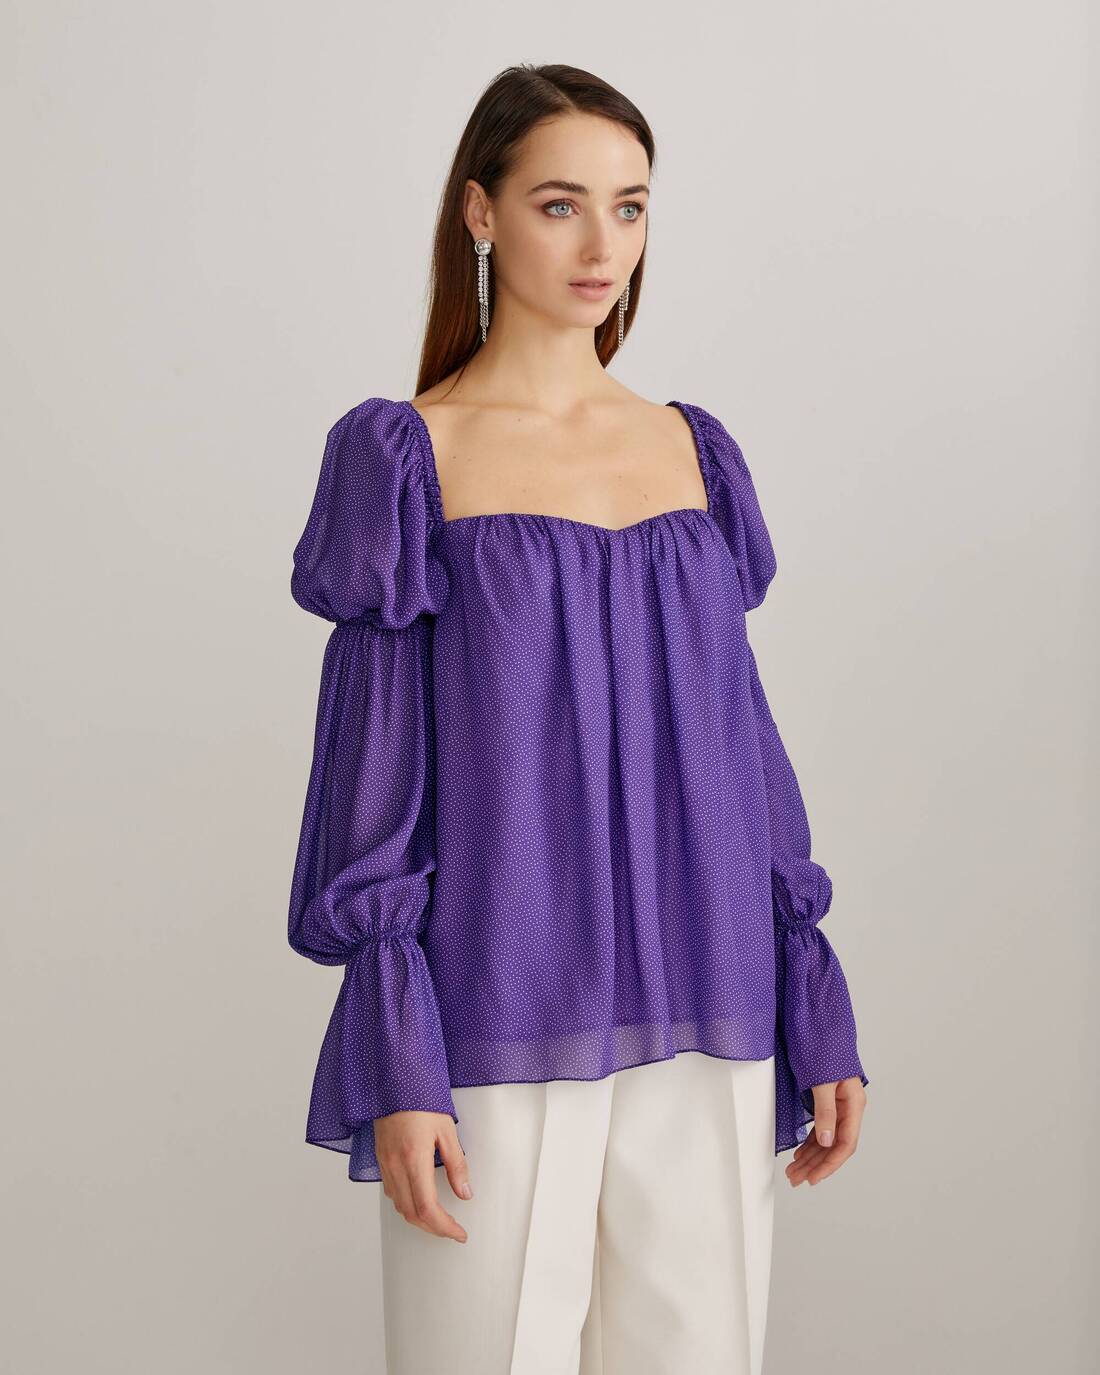 Blouse with ruffles and a polka dot print